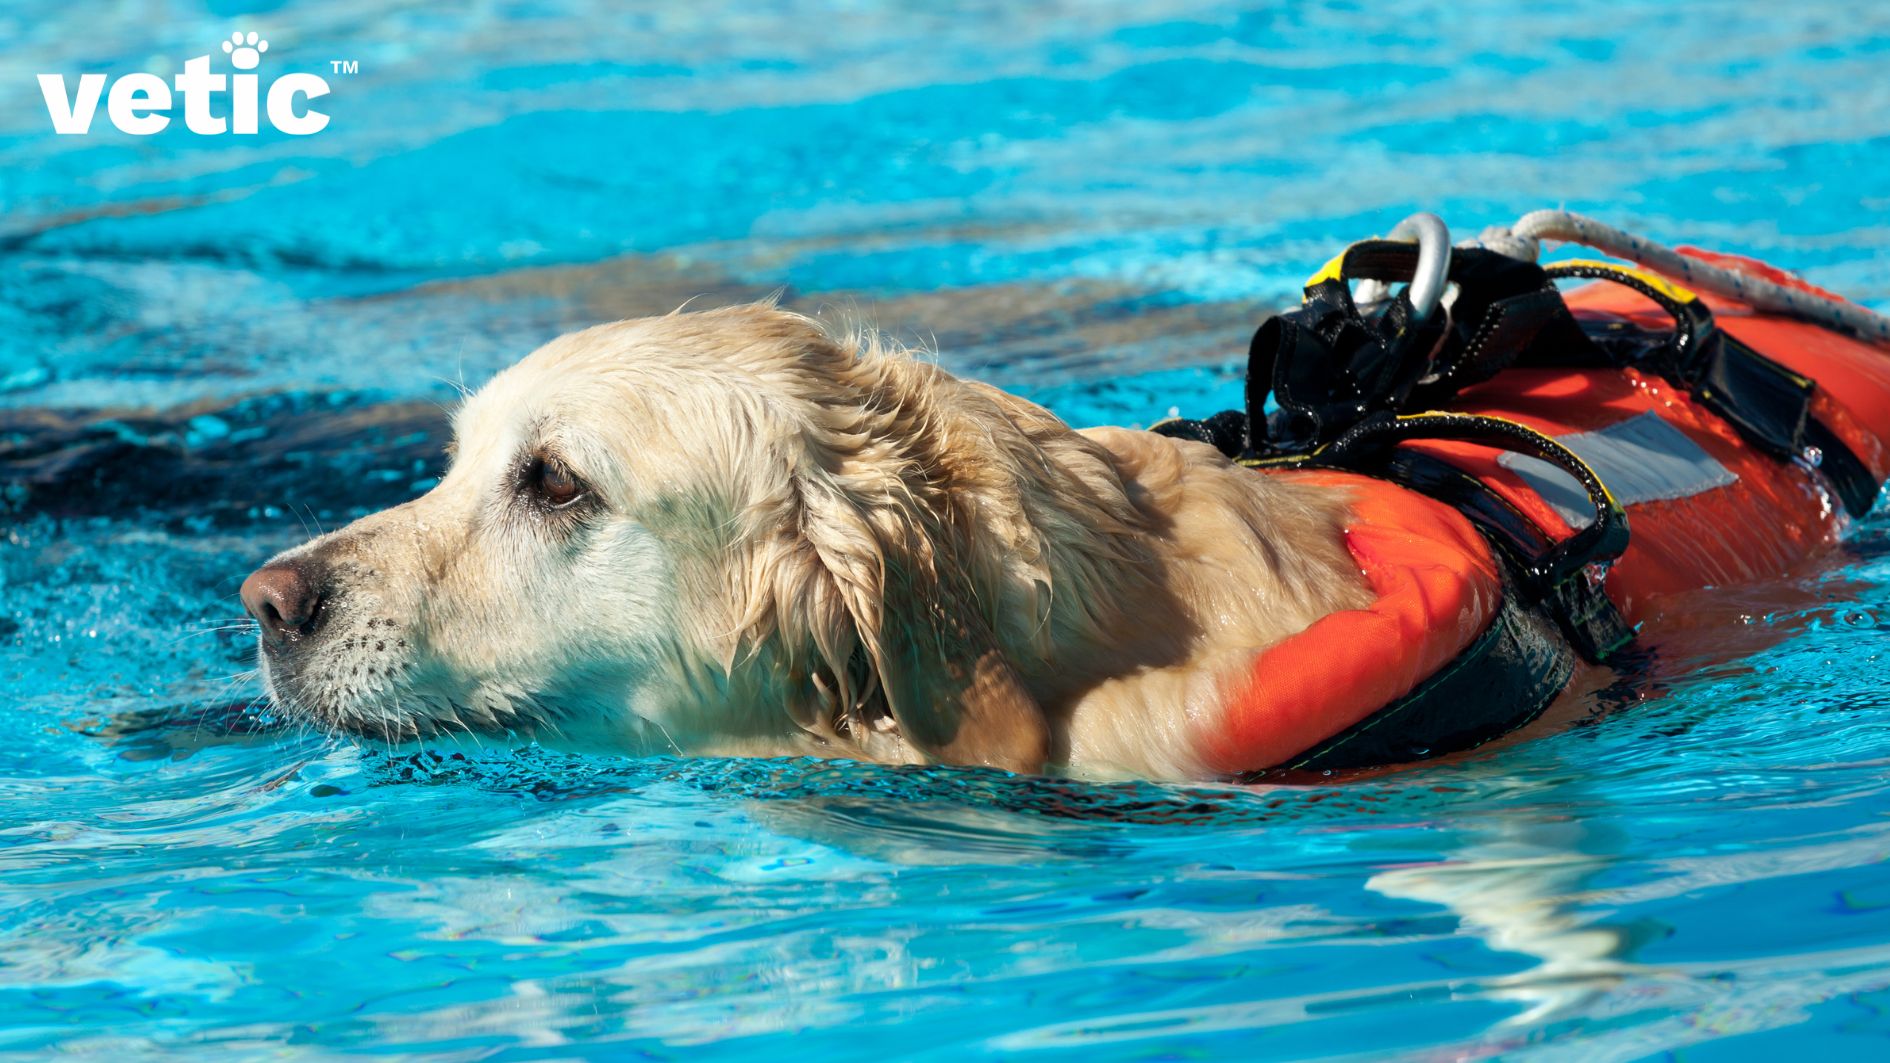 Photo of a Golden Labrador in a life jacket swimming in a pool. Goldens are particularly susceptible to hip dysplasia and hydrotherapy is one effective way to reduce their pain and discomfort.